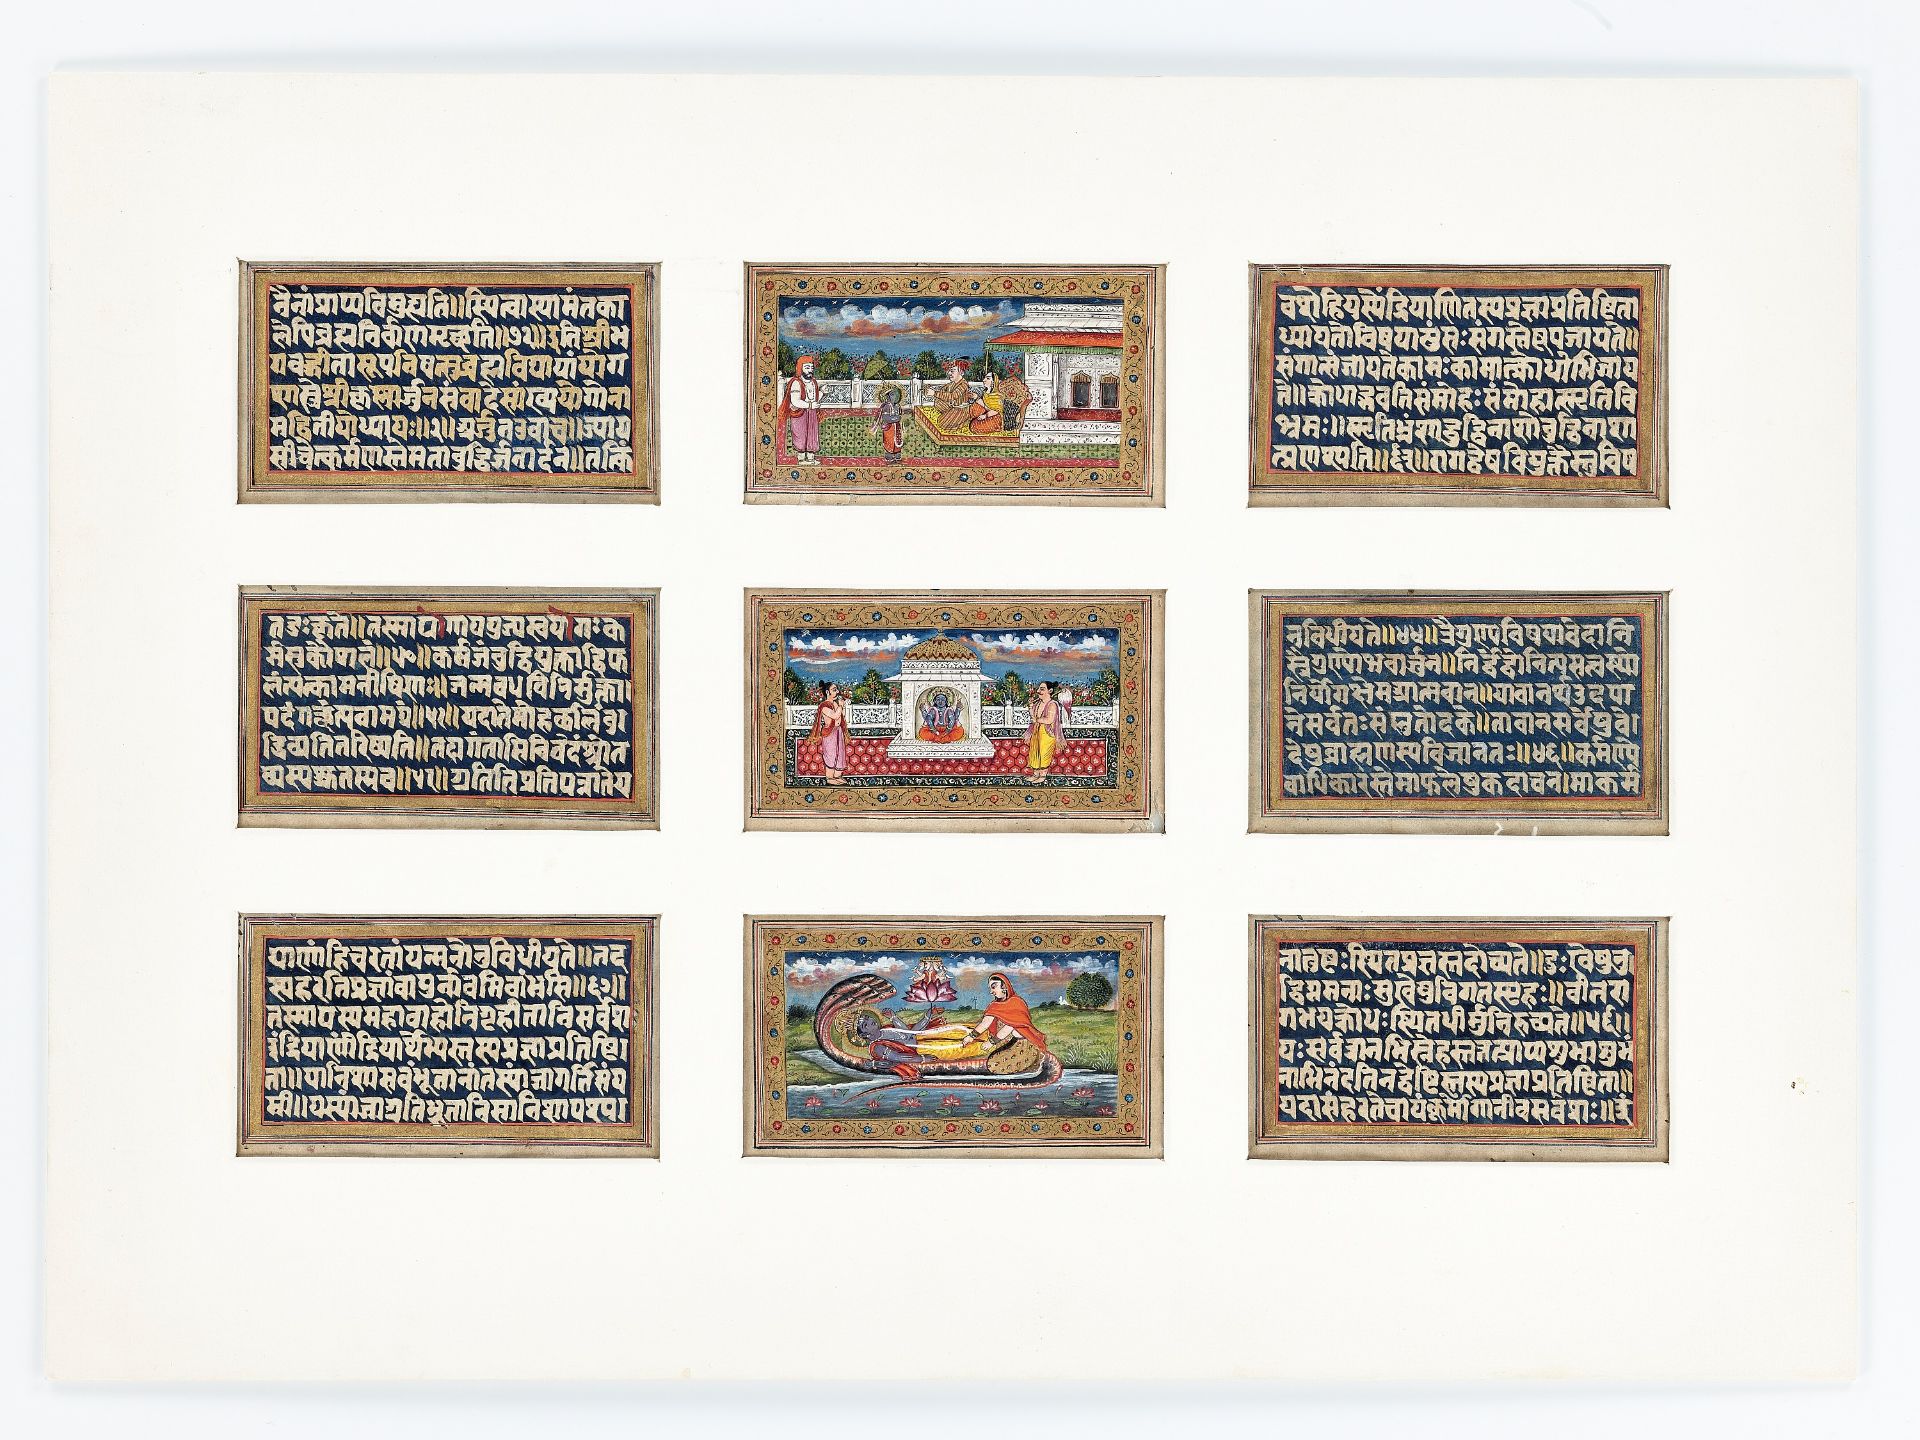 A RARE GROUP OF 27 FOLIOS FROM A MANUSCRIPT, KASHMIR 18TH CENTURY - Image 13 of 15